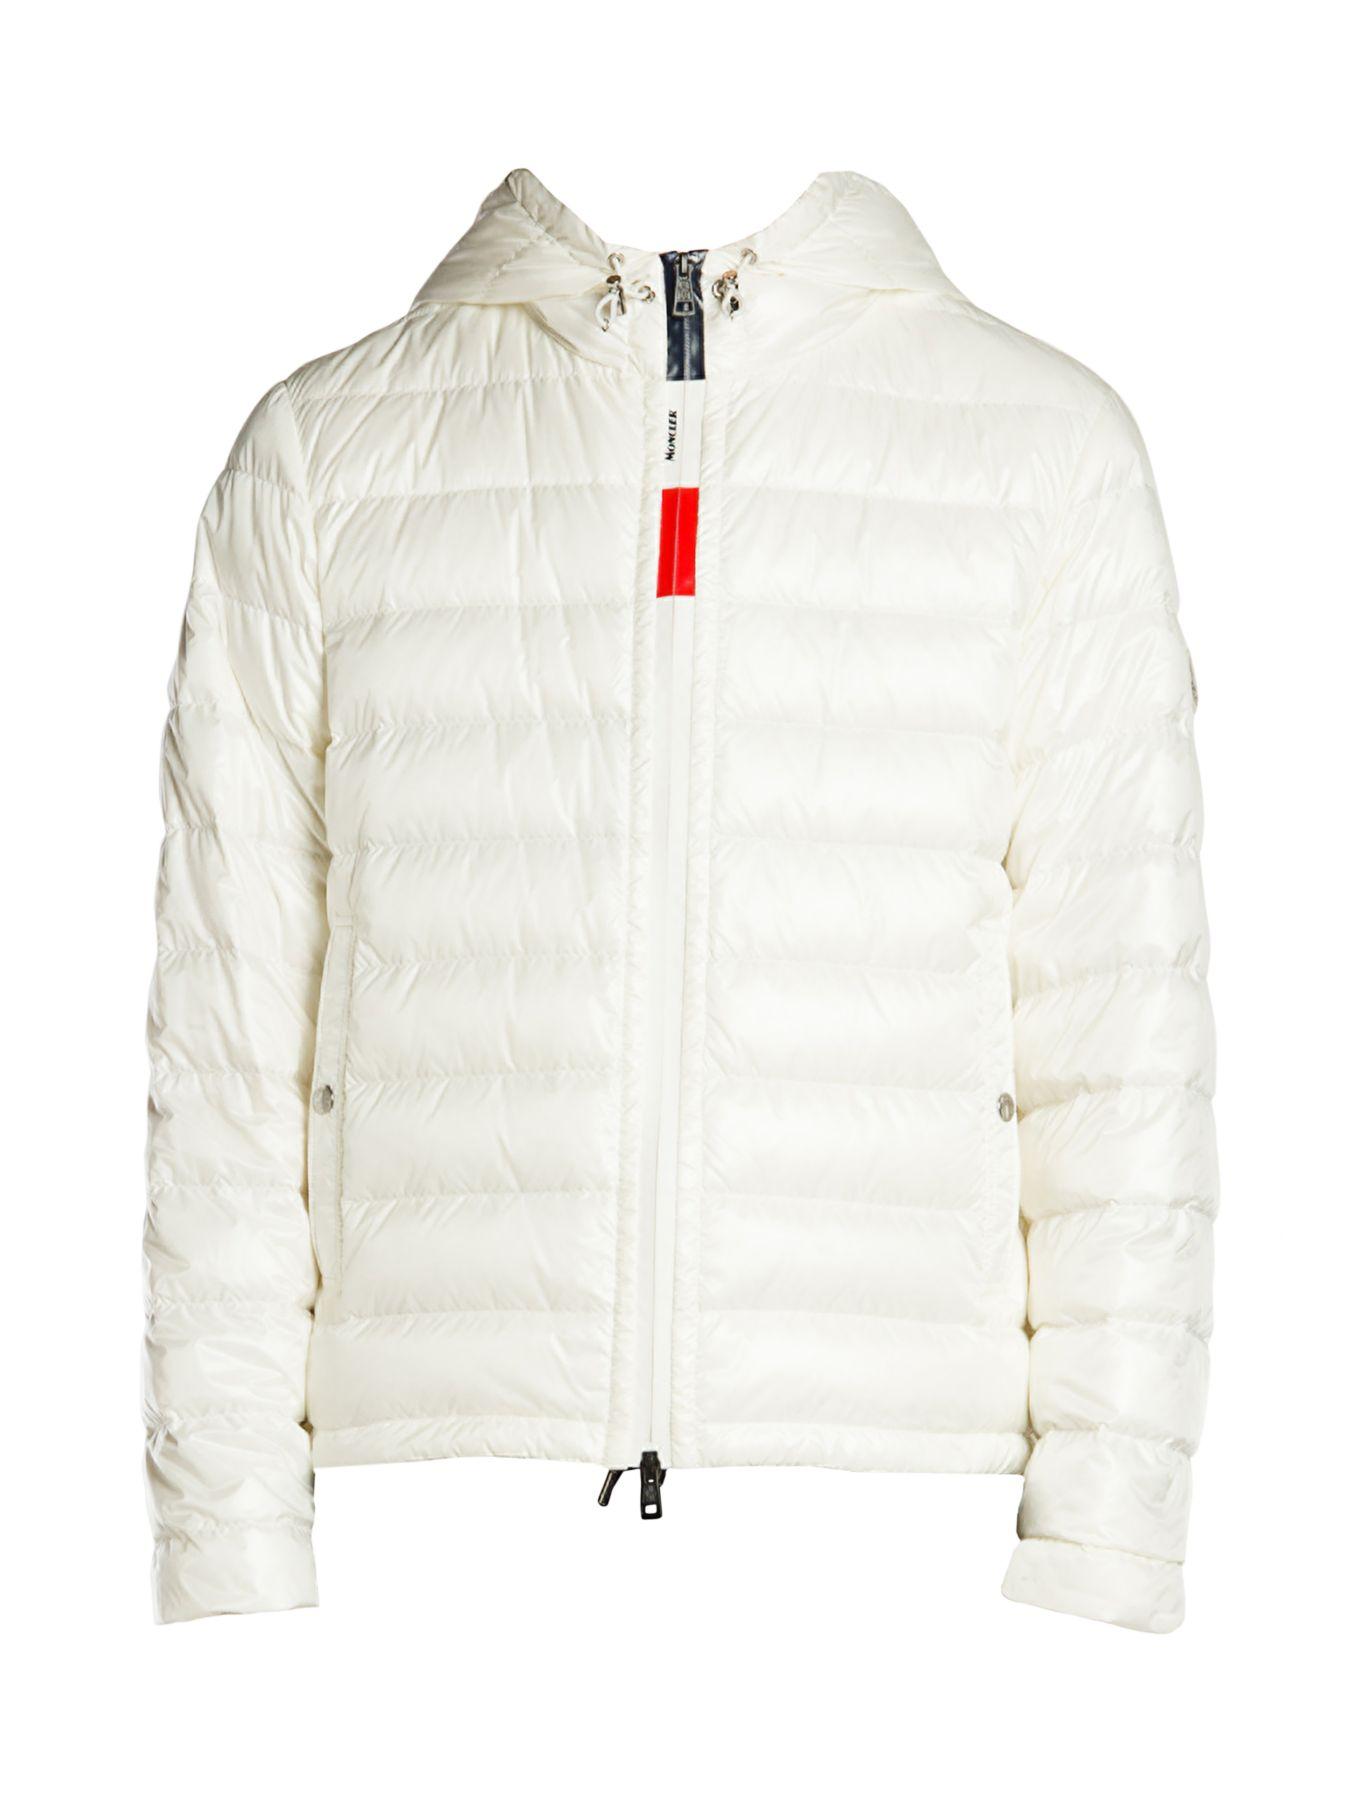 Moncler Goose Rook Down Puffer Jacket in White for Men - Lyst